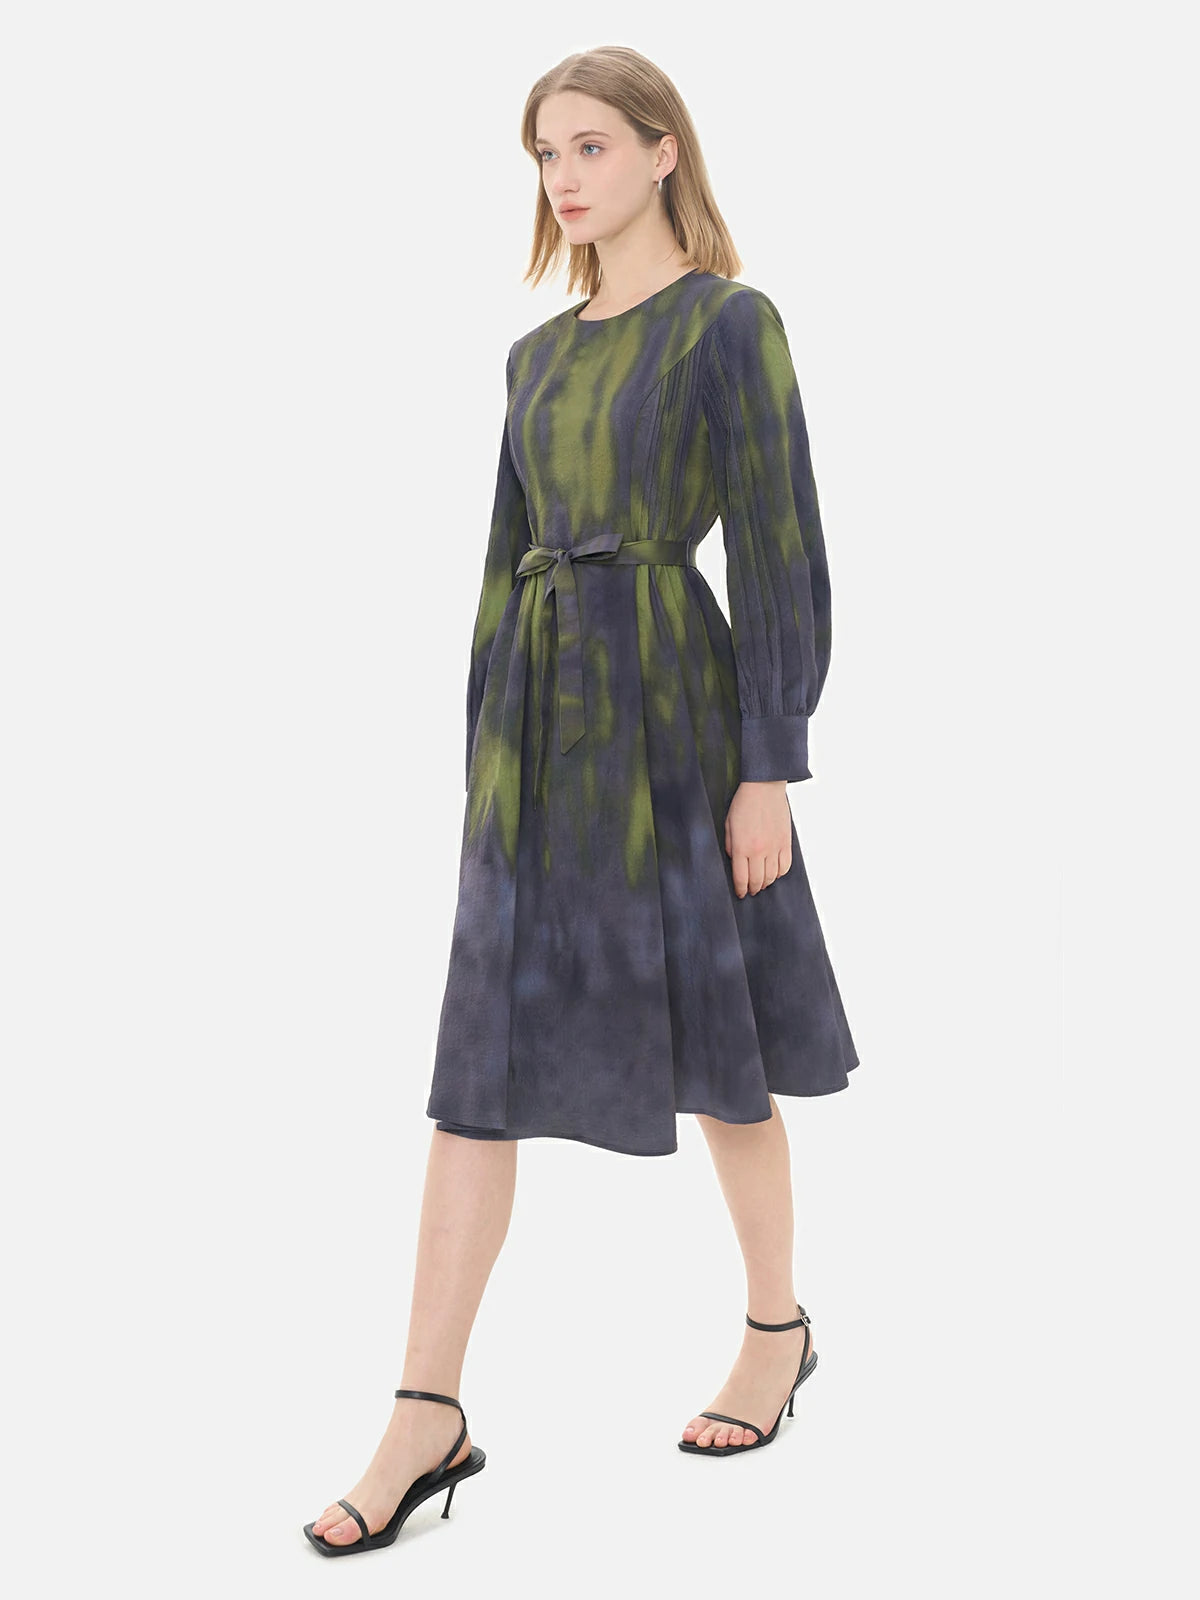 Make a statement in this versatile round-neck dress, showcasing a distinctive gray and green ombre, tied waist